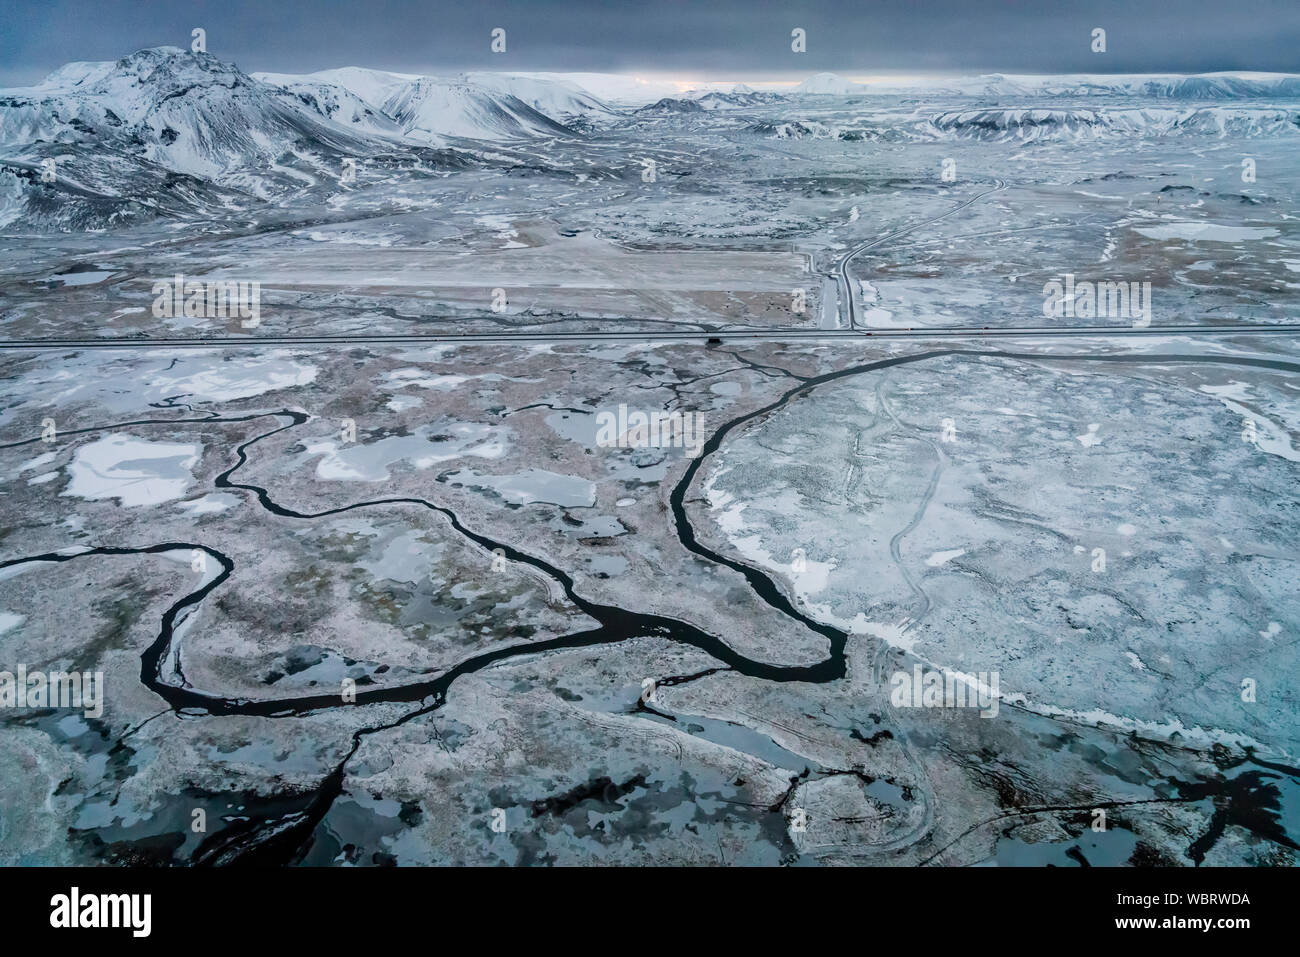 Aerial - rivers, snow and mountains, Hellisheidi, Iceland Stock Photo